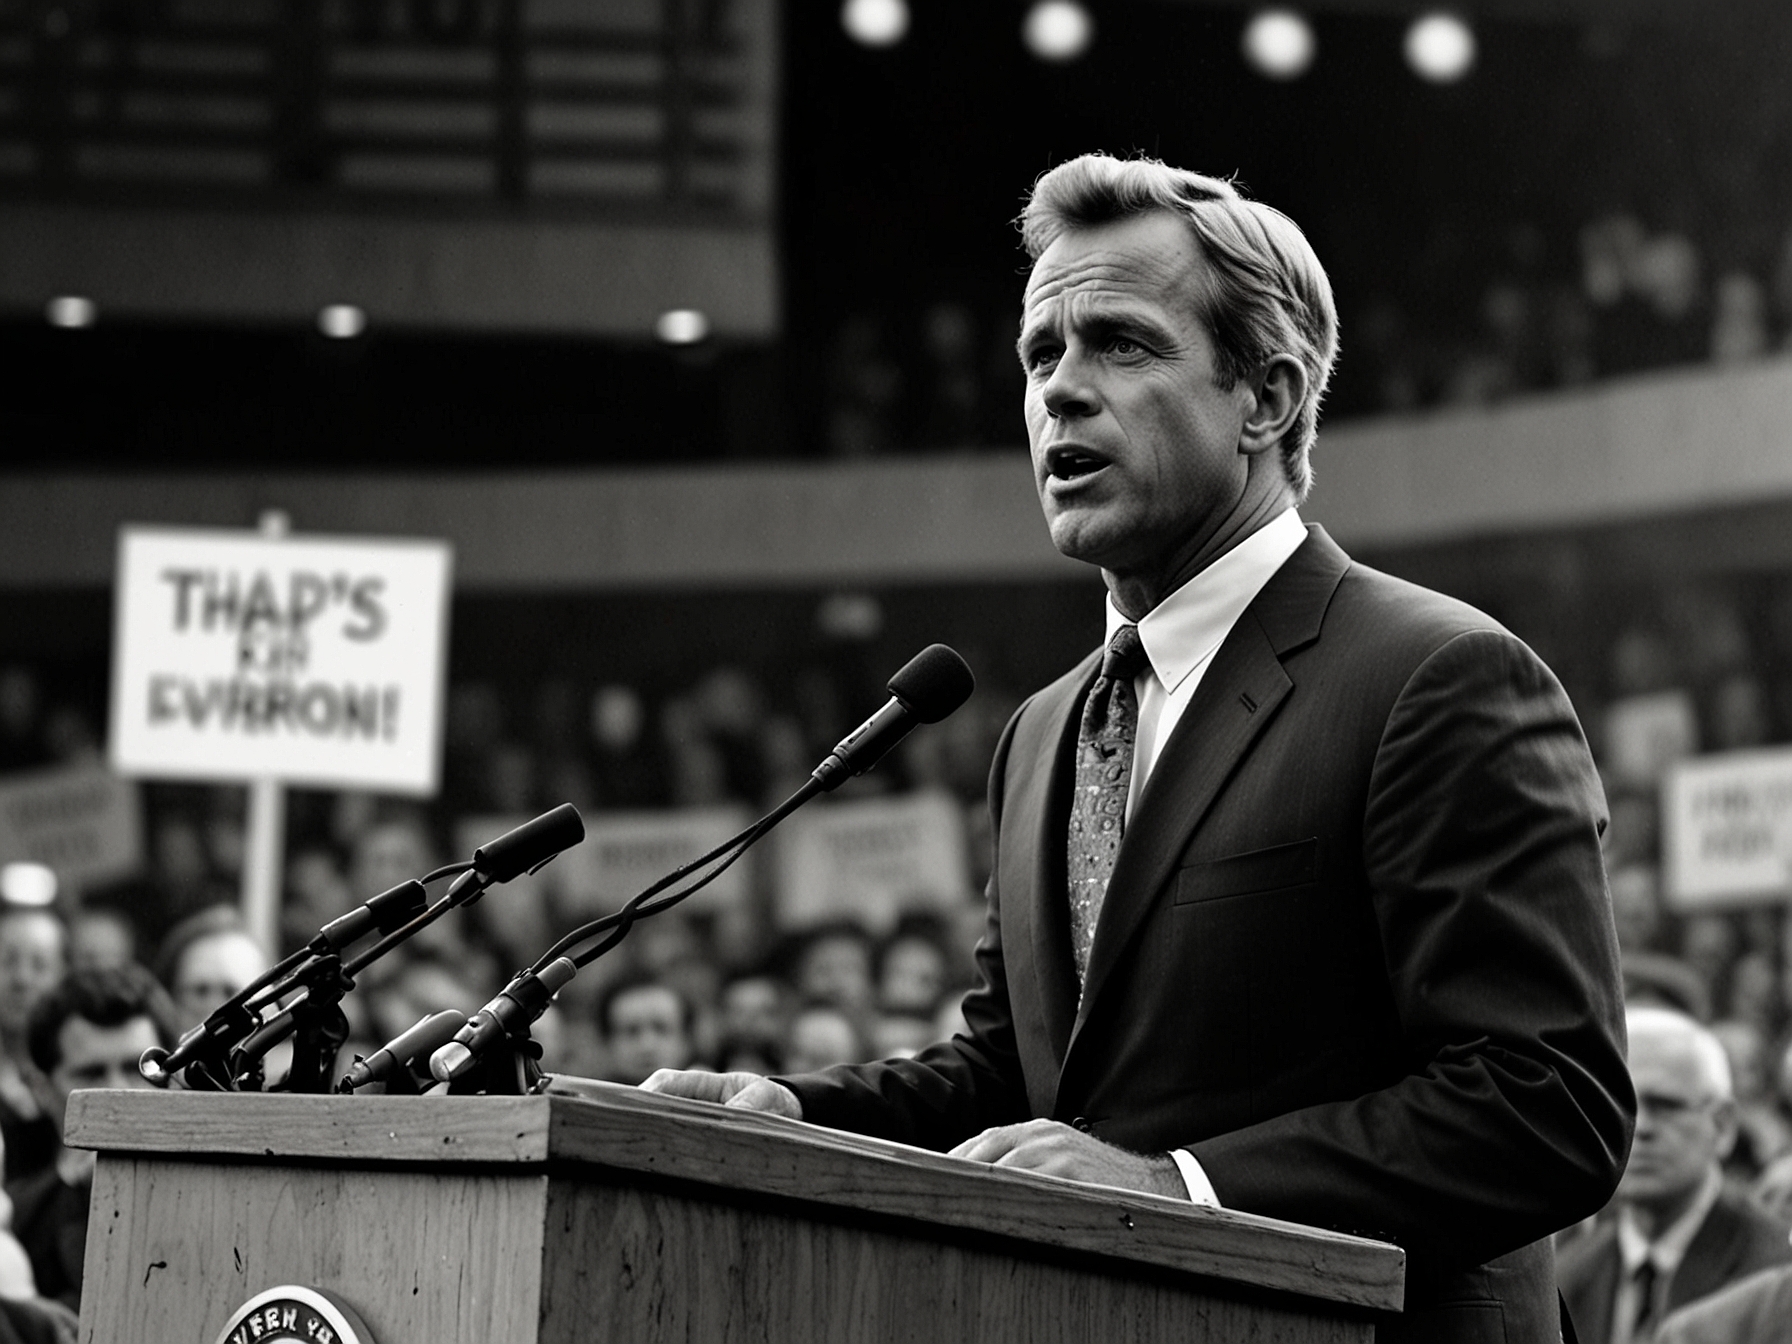 Robert F. Kennedy Jr. speaking passionately at a campaign rally, emphasizing the importance of addressing healthcare reform, environmental policies, and government transparency.